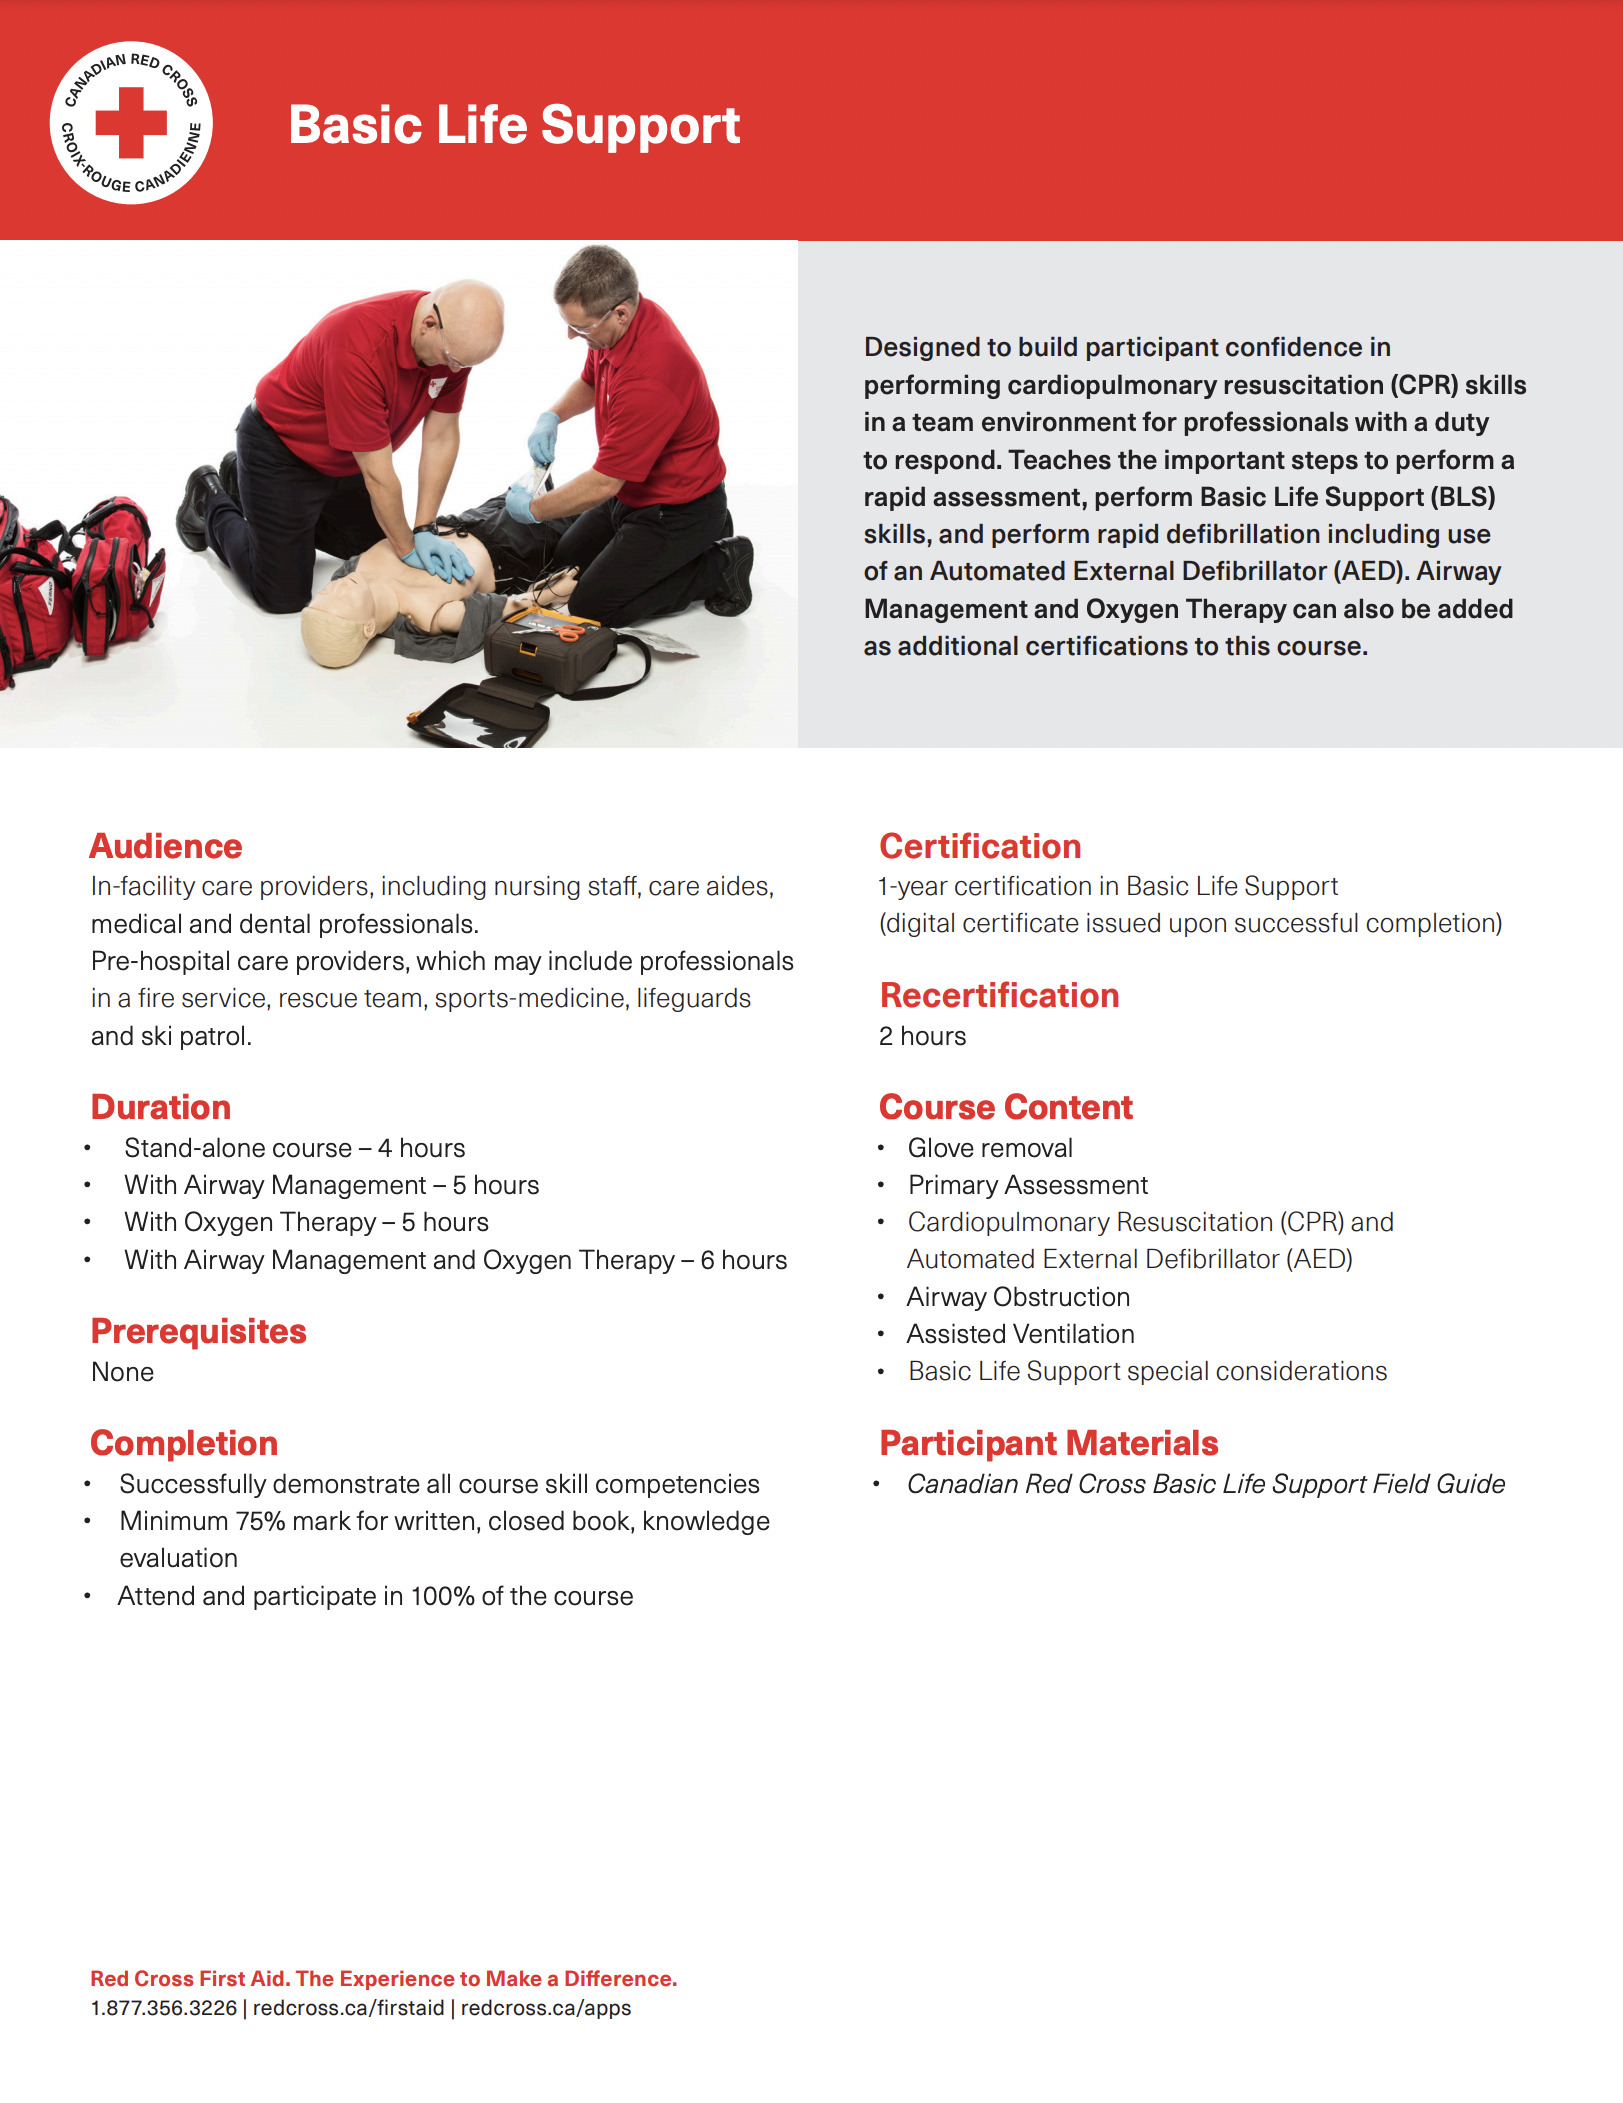 research articles on basic life support